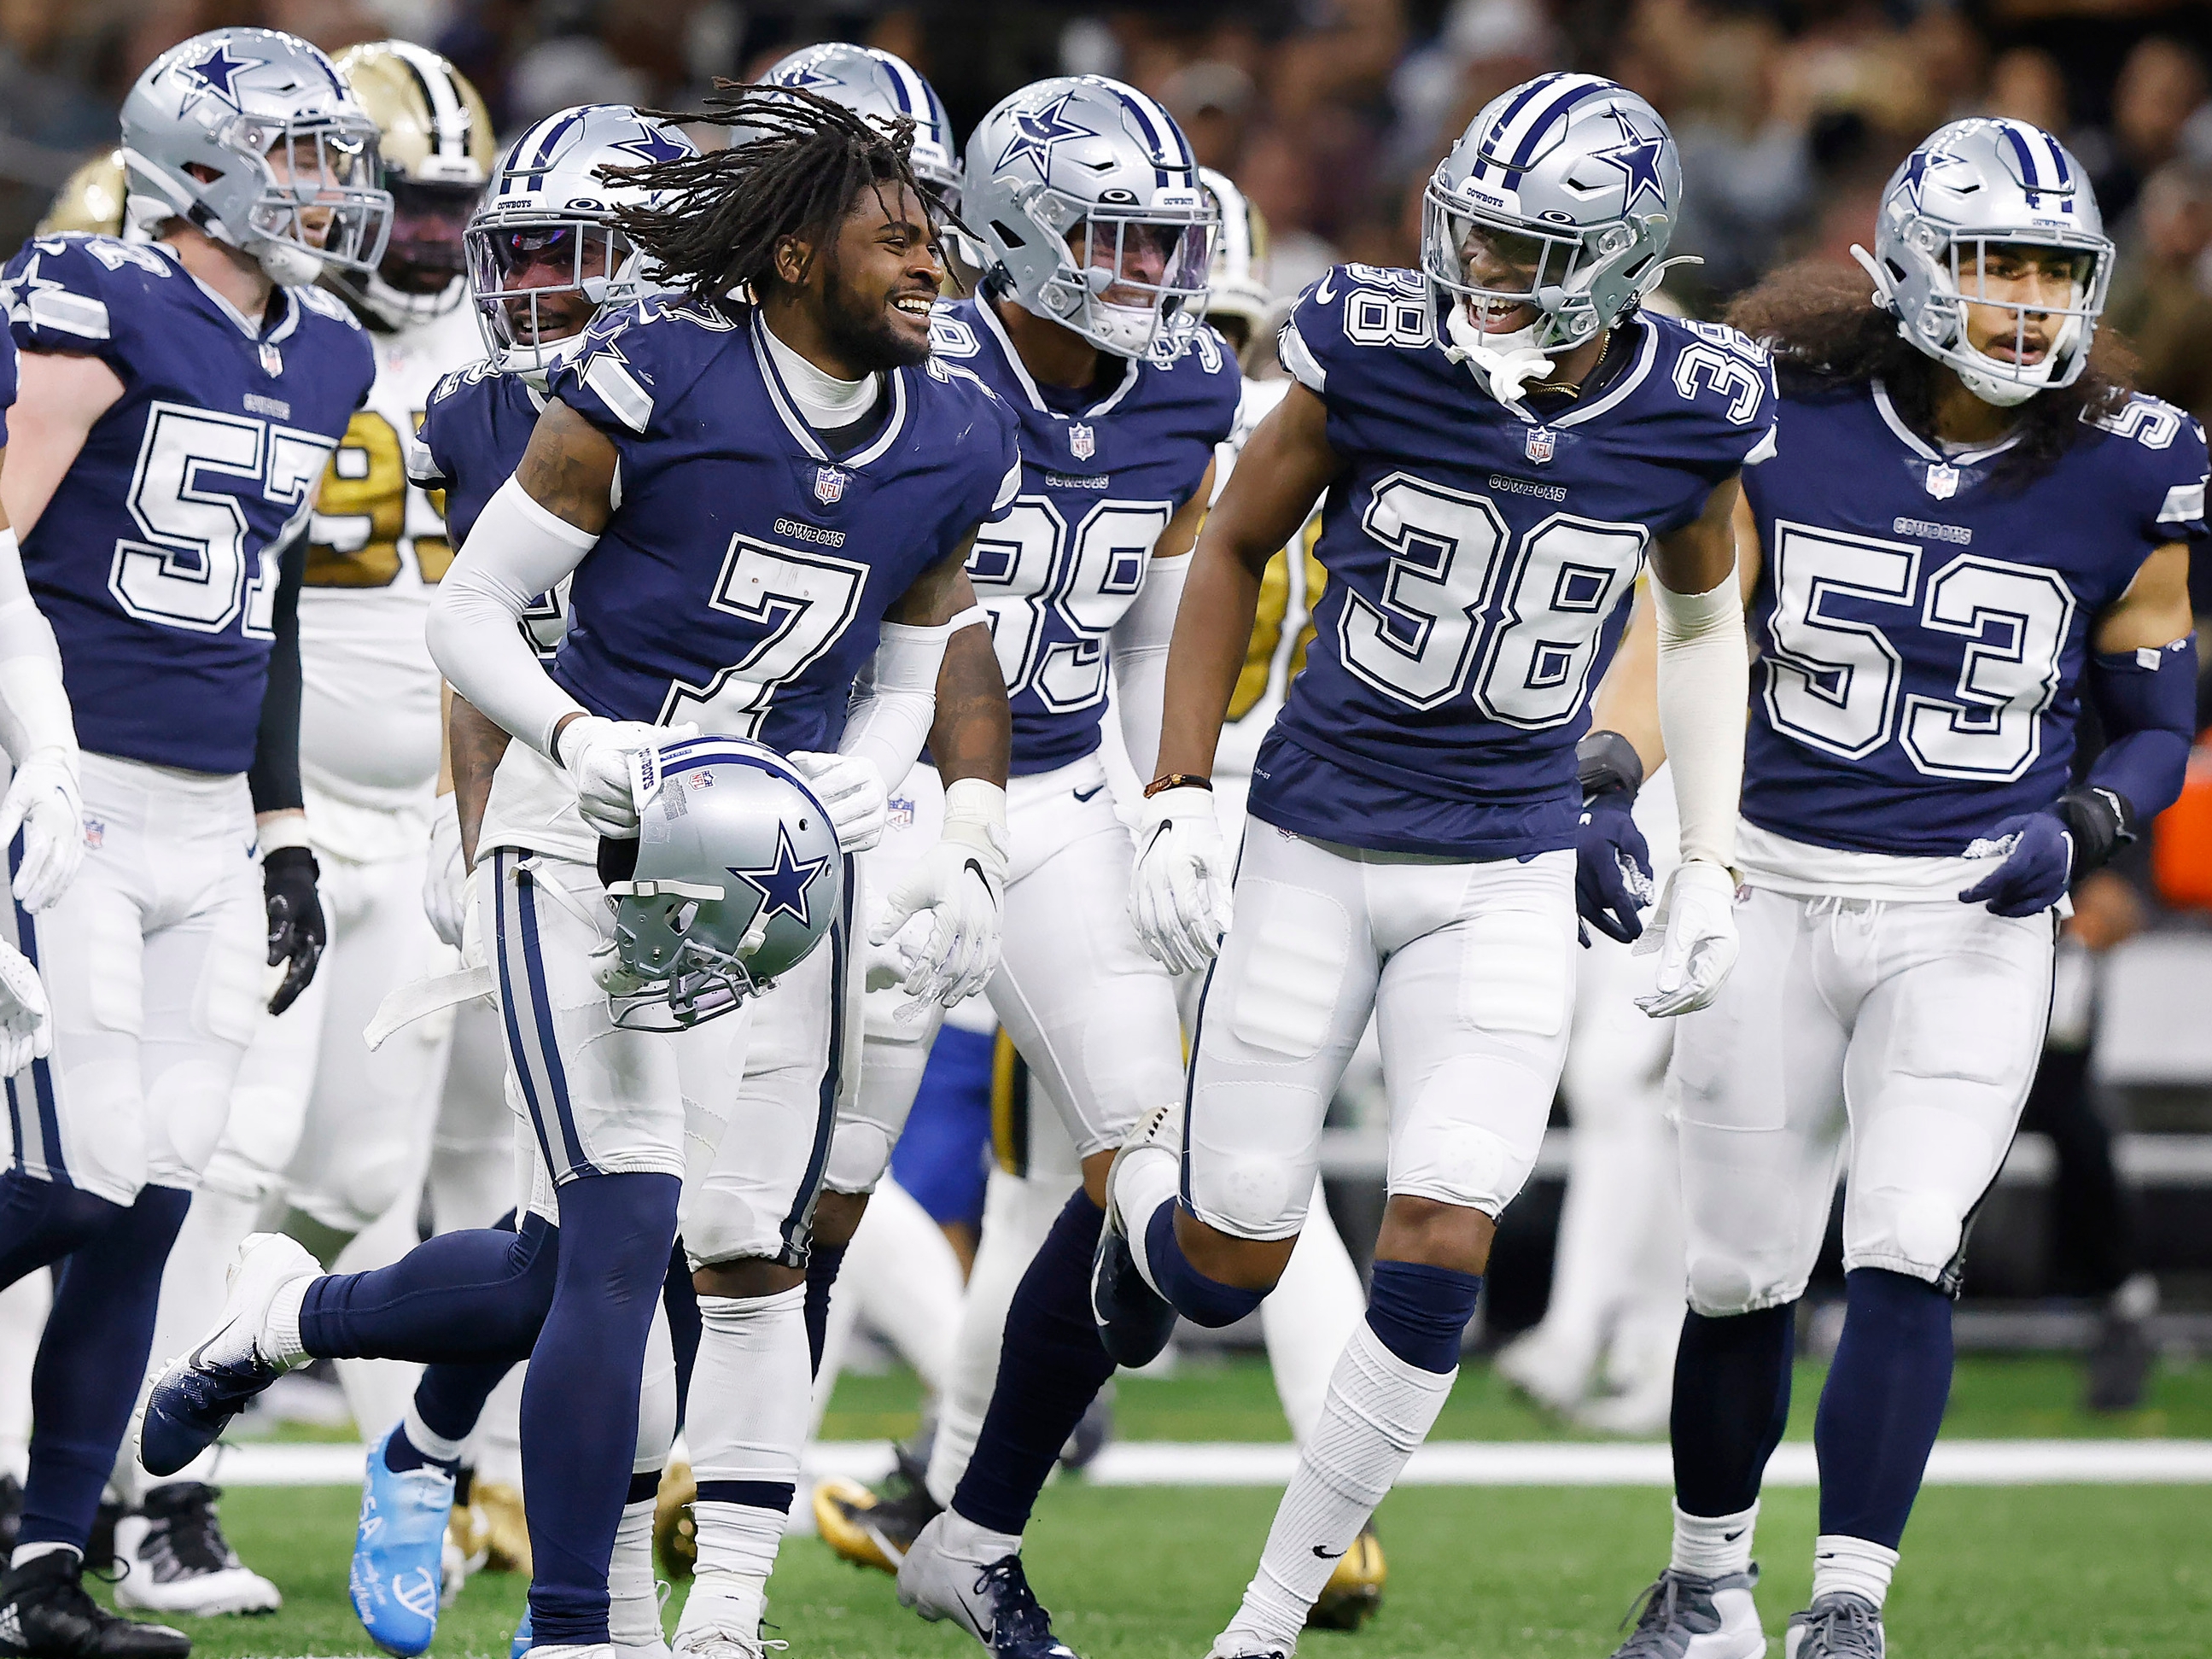 Cowboys playoff picture: Dallas clinches berth after Giants win